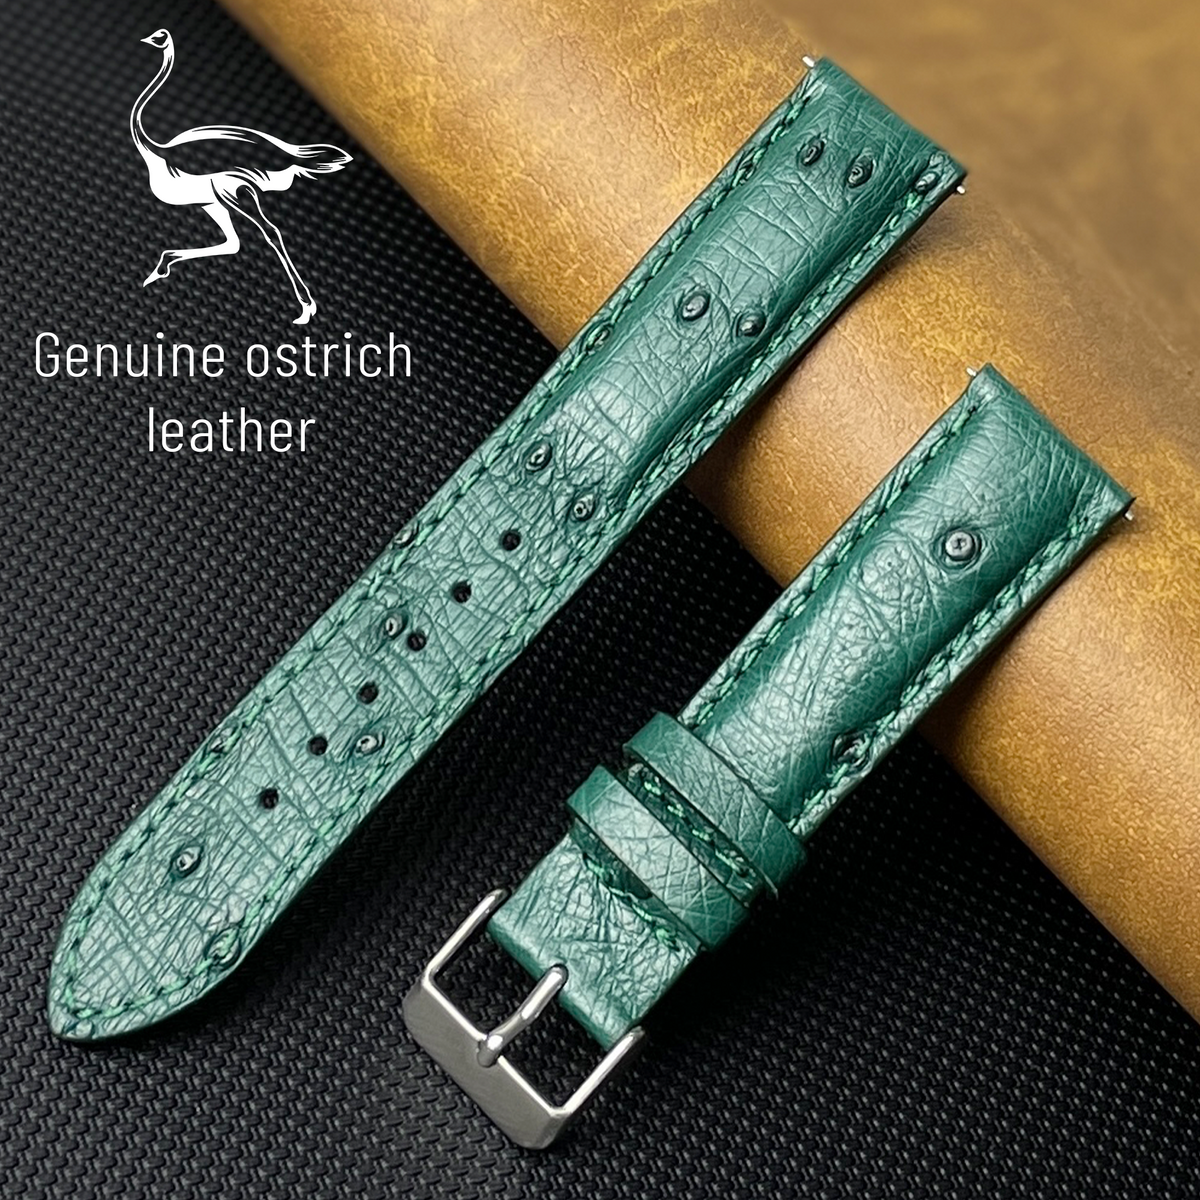 vinacreations Blue Genuine Ostrich Watch Strap Quick Release DH-184, 18mm/16mm / Regular Length (125mm-75mm)